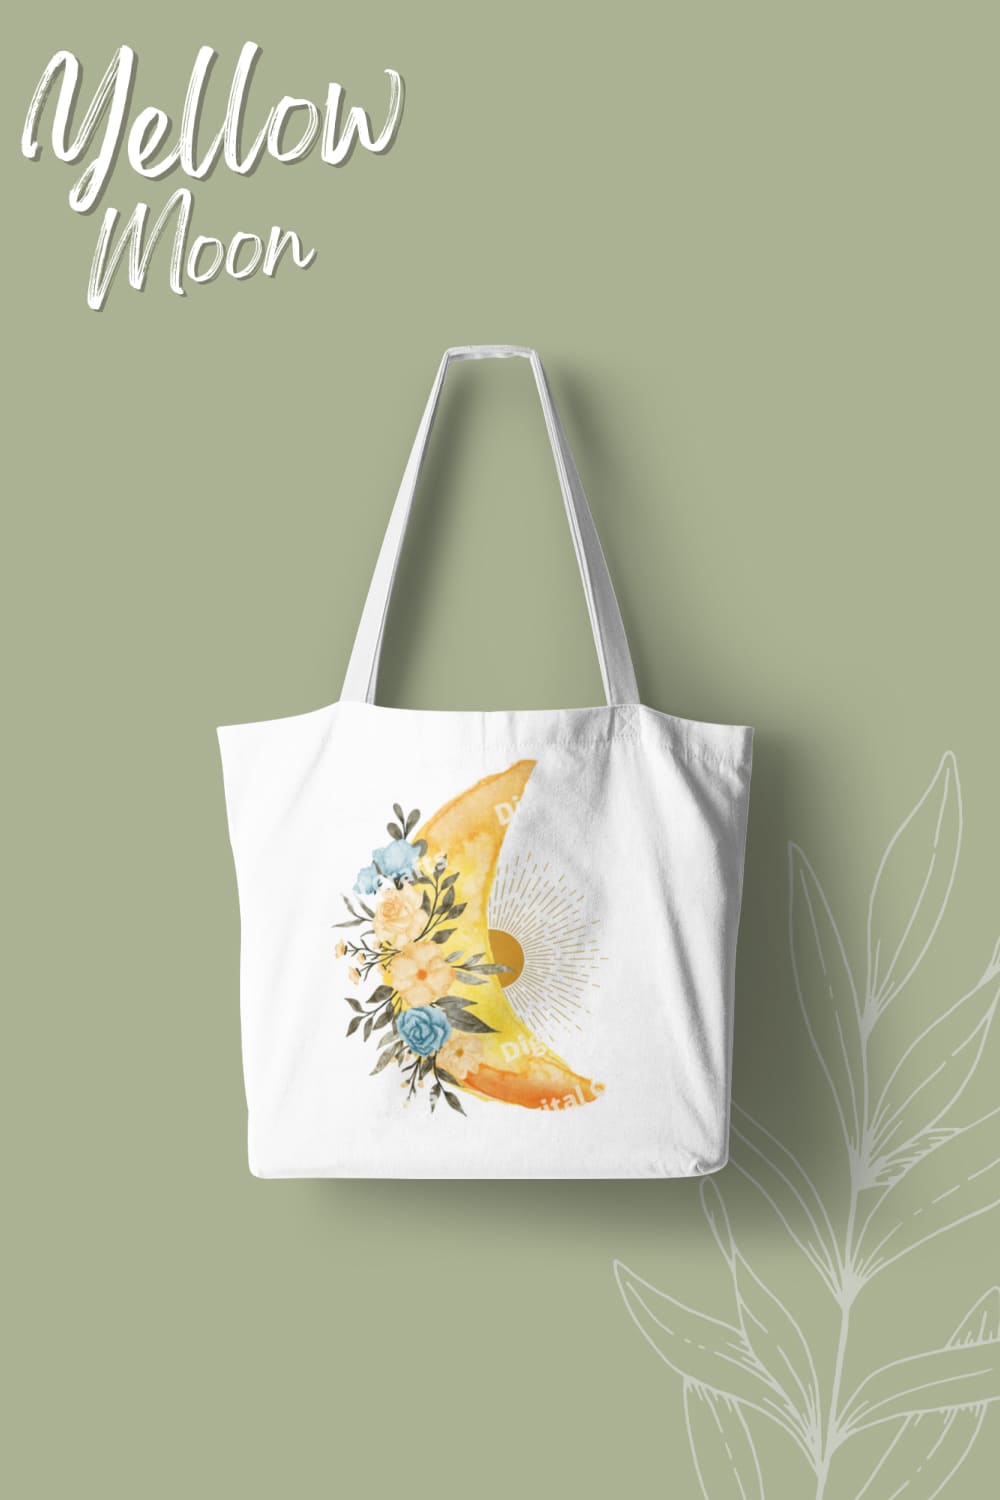 Image of a white bag with a wonderful yellow moon print with watercolor flowers.